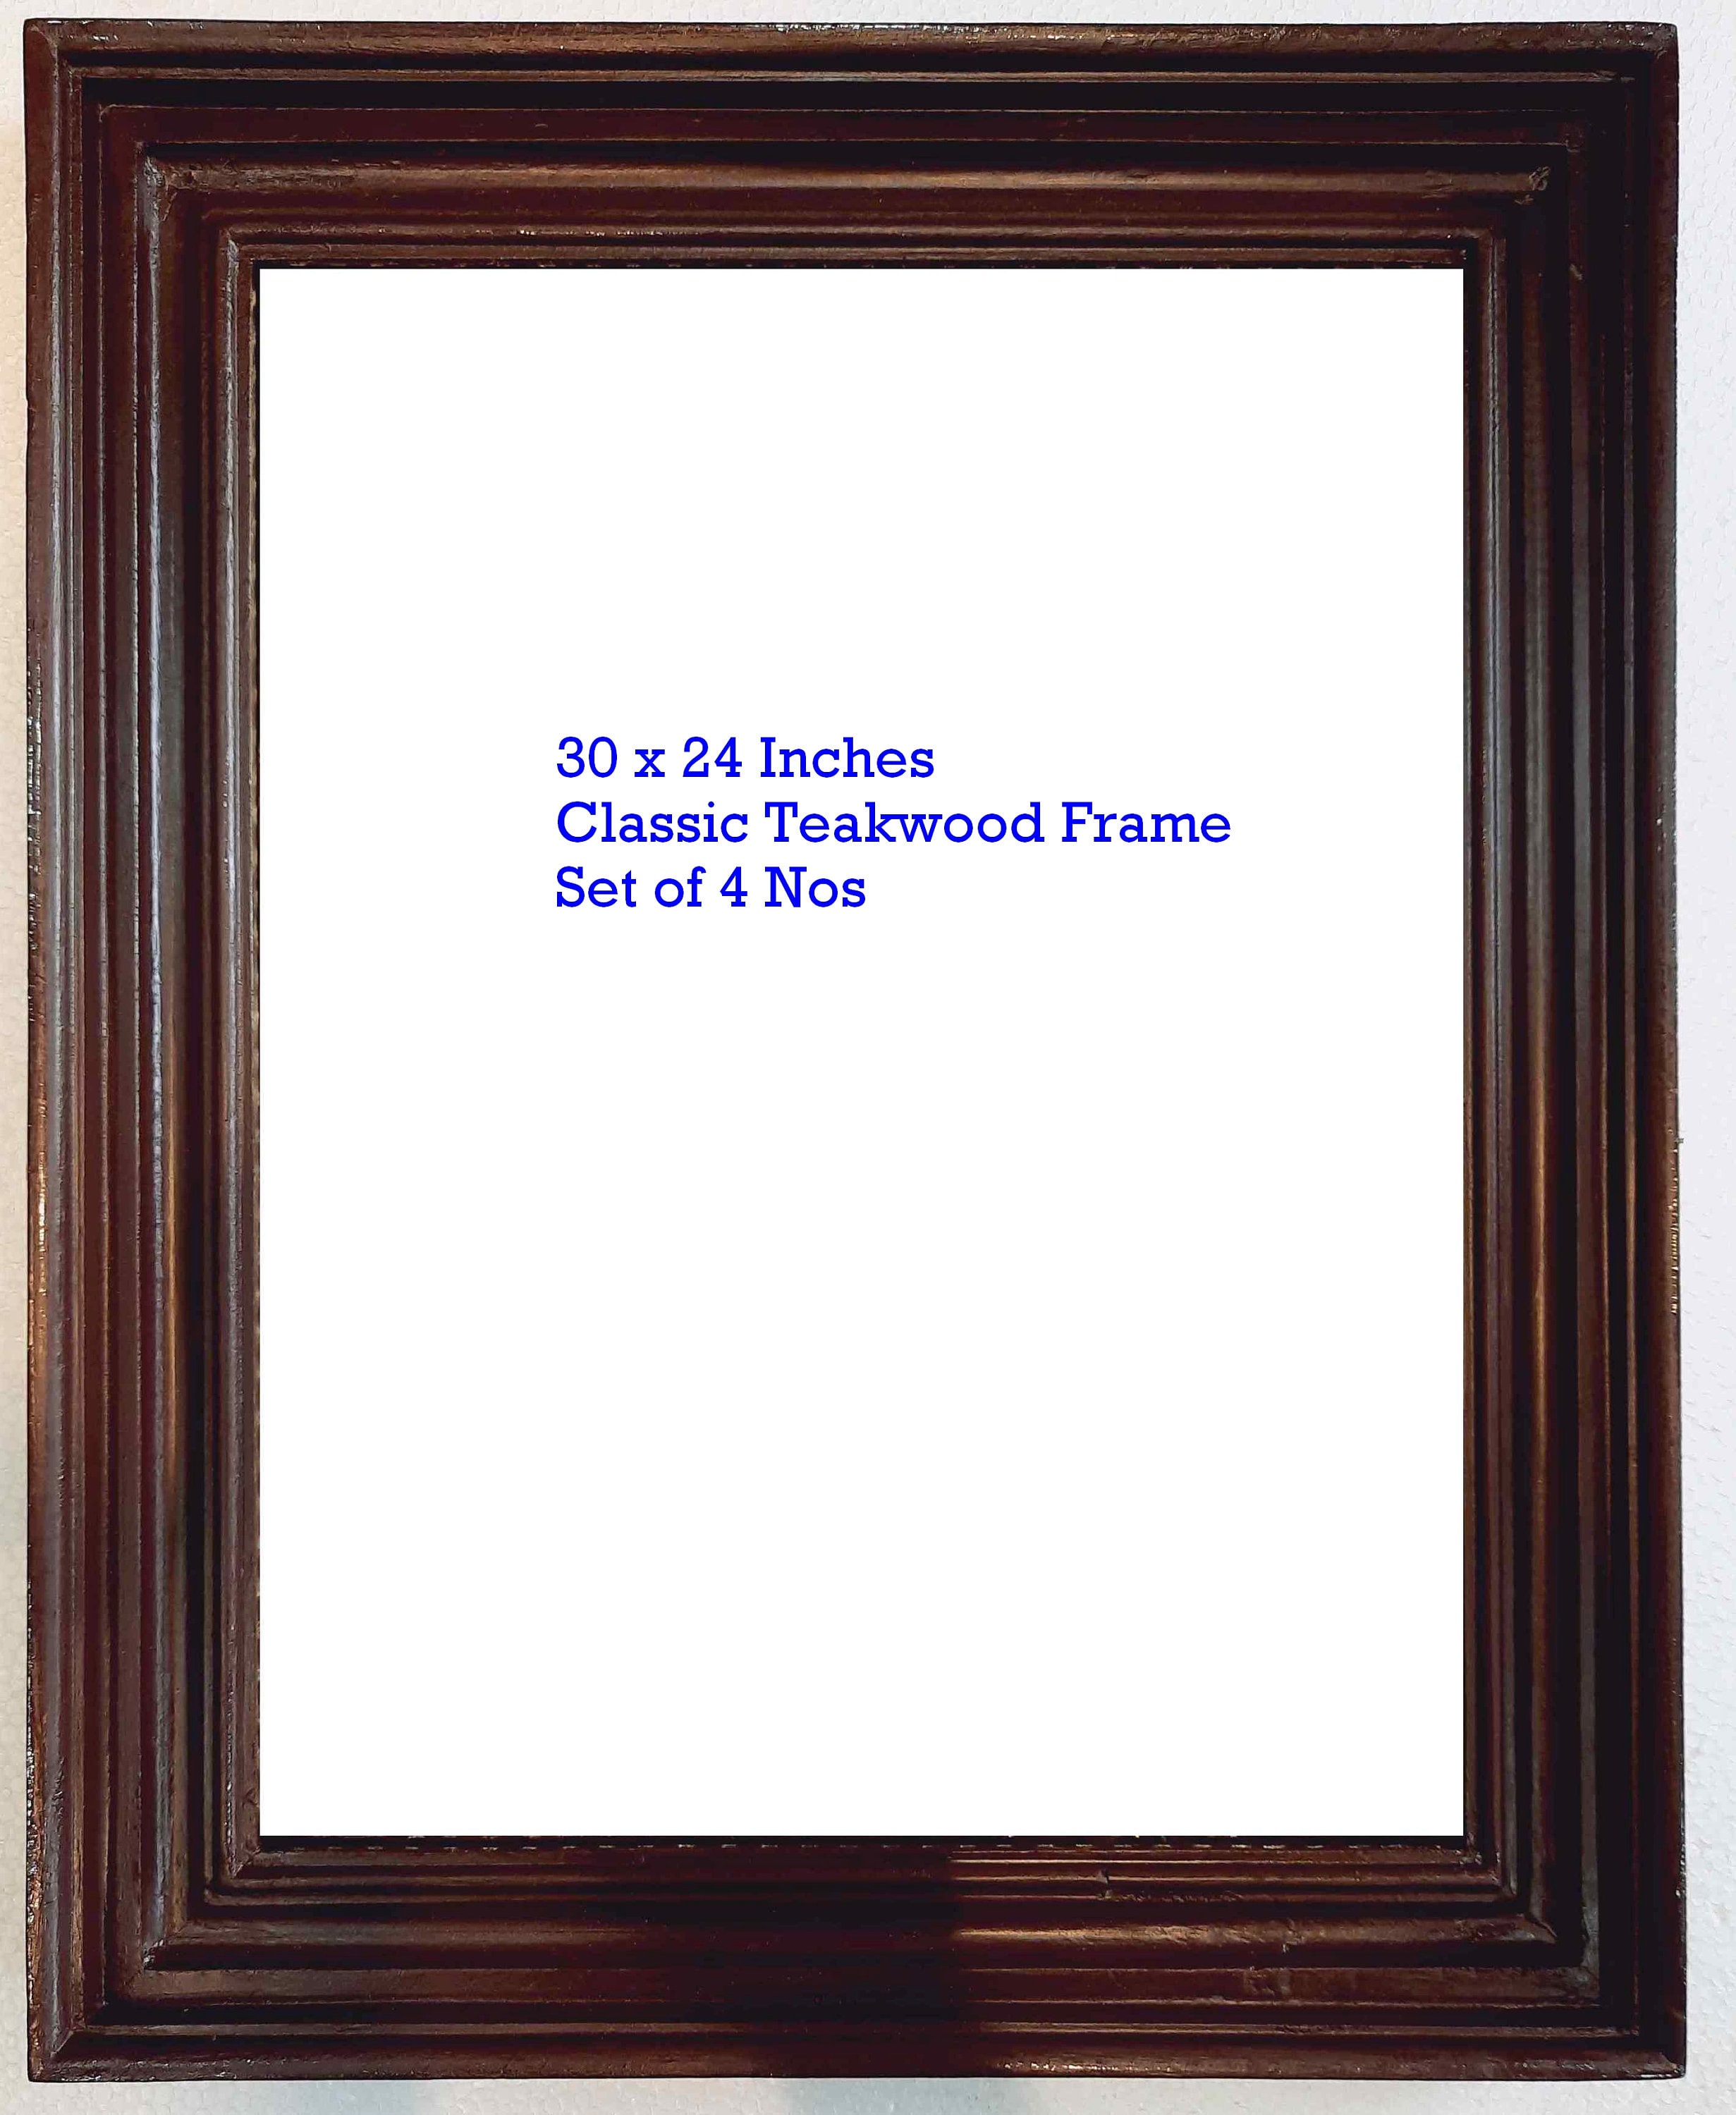 Custom Size Magnetic Hanging Frame, 30x30 Frame, 30x40 Picture